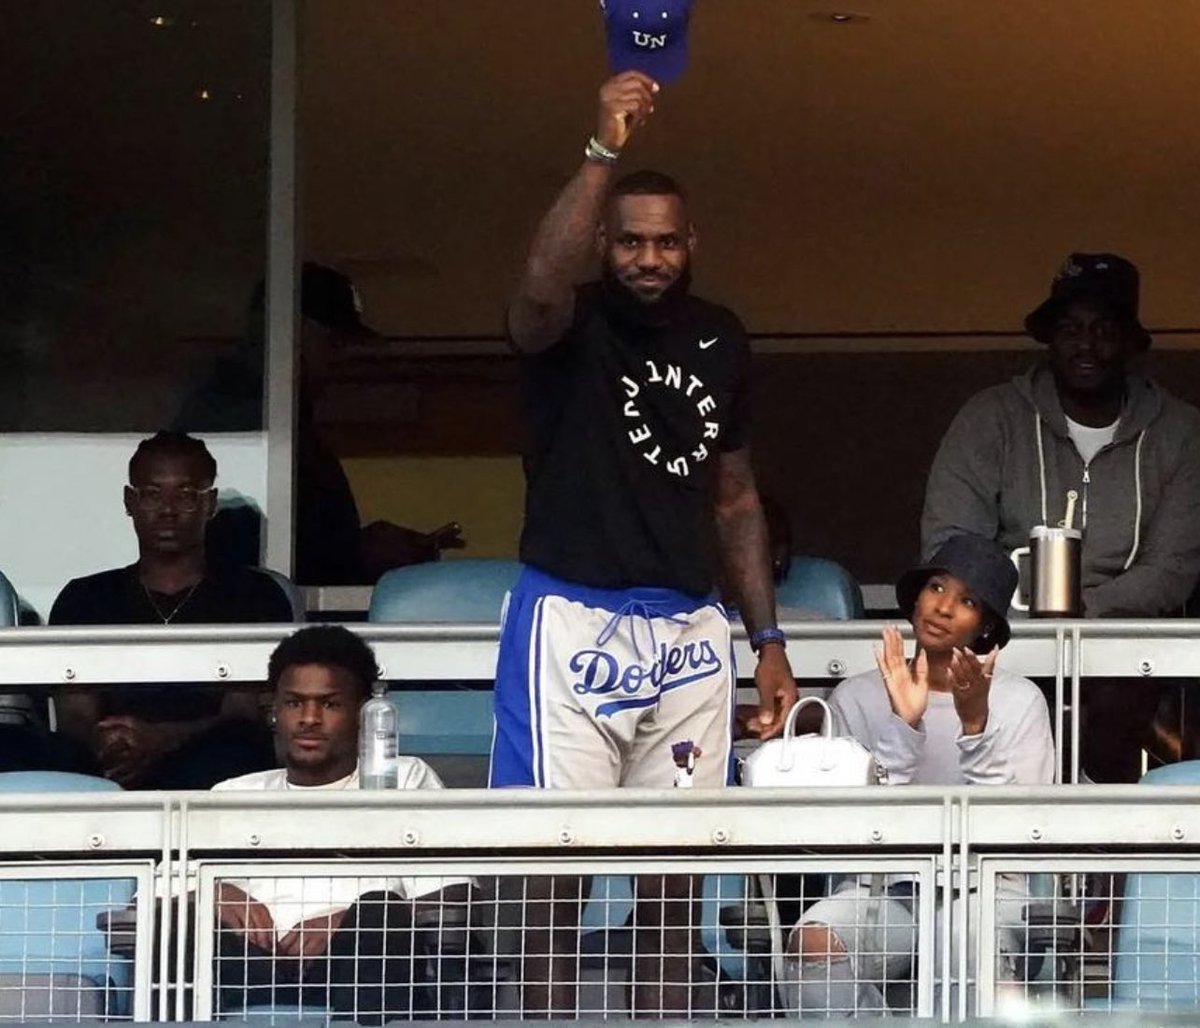 LeBron at the Dodgers’ game with his family on Saturday